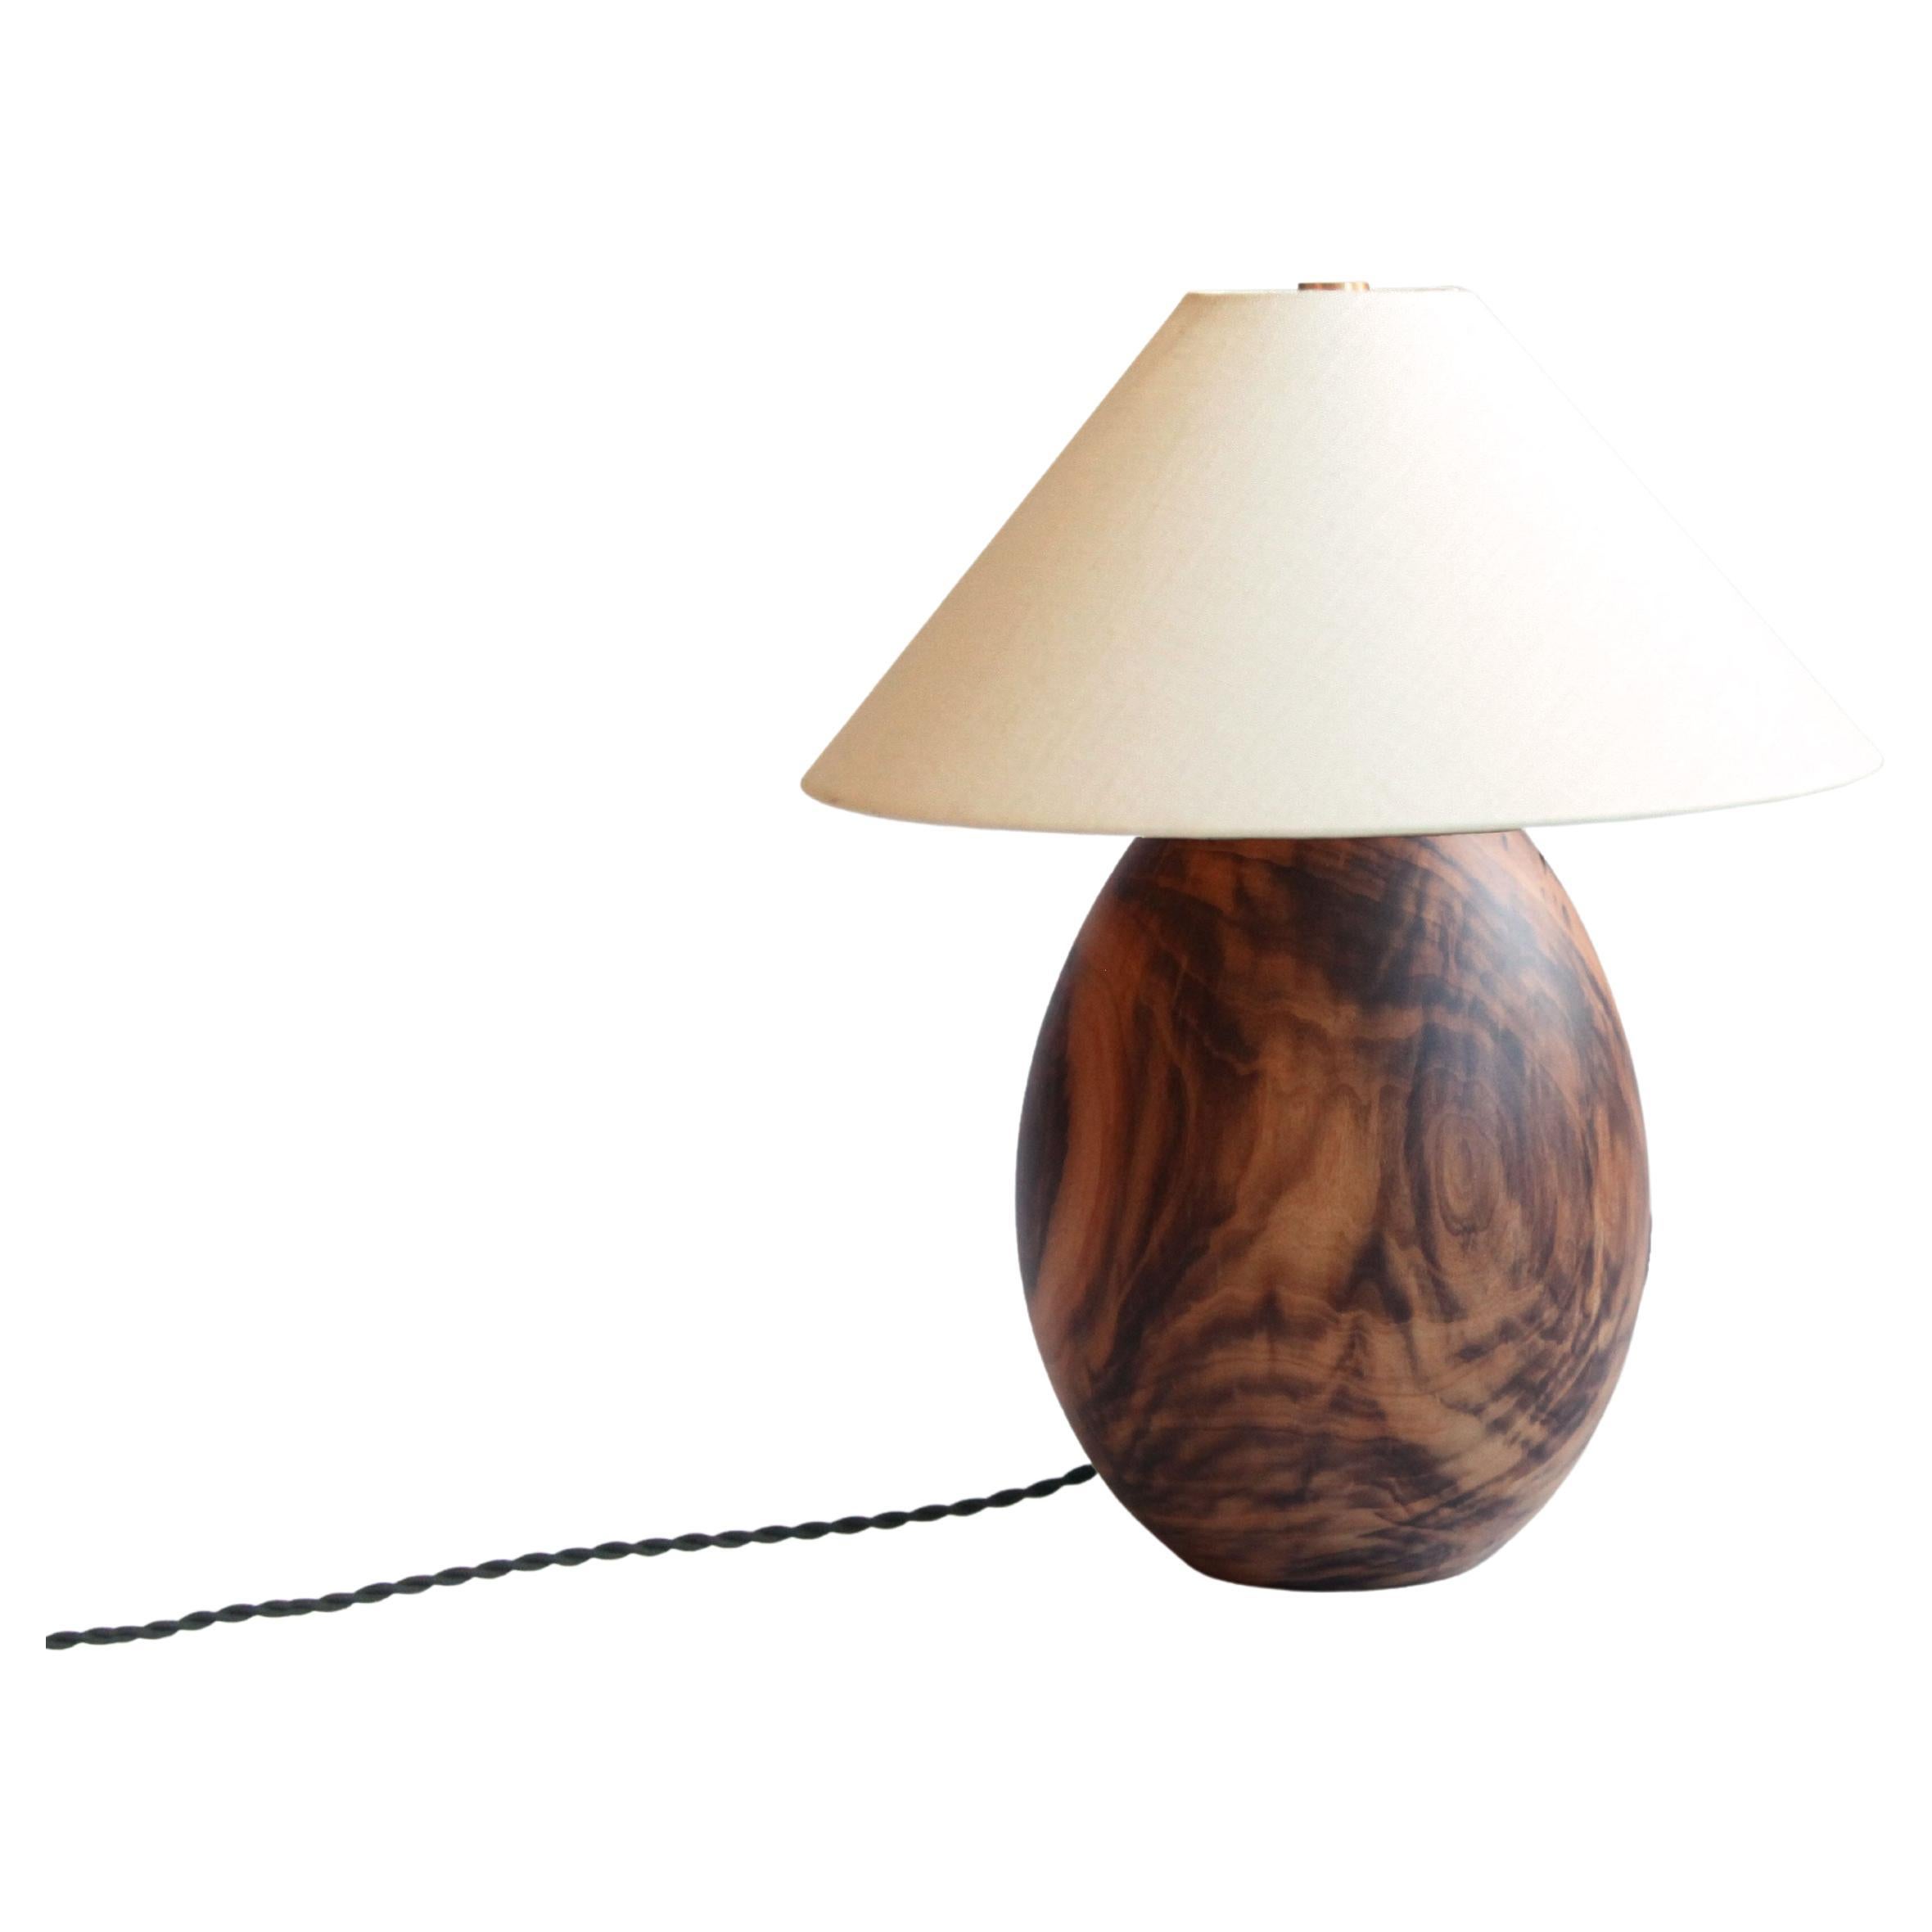 Tropical Hardwood Lamp and White Linen Shade, Small, Árbol Collection, 18